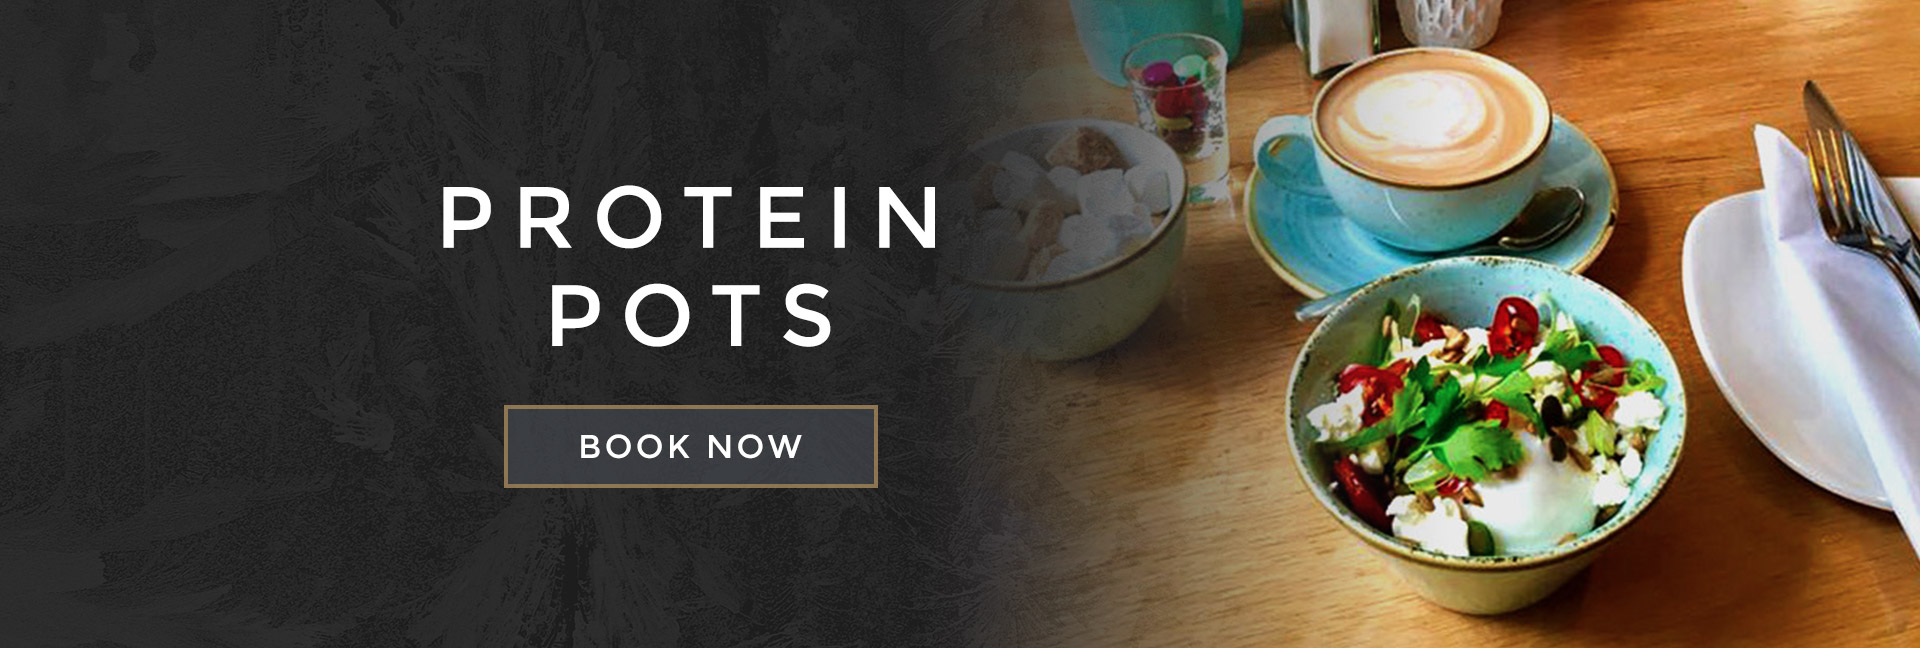 Protein pots at All Bar One Houndsditch - Book your table